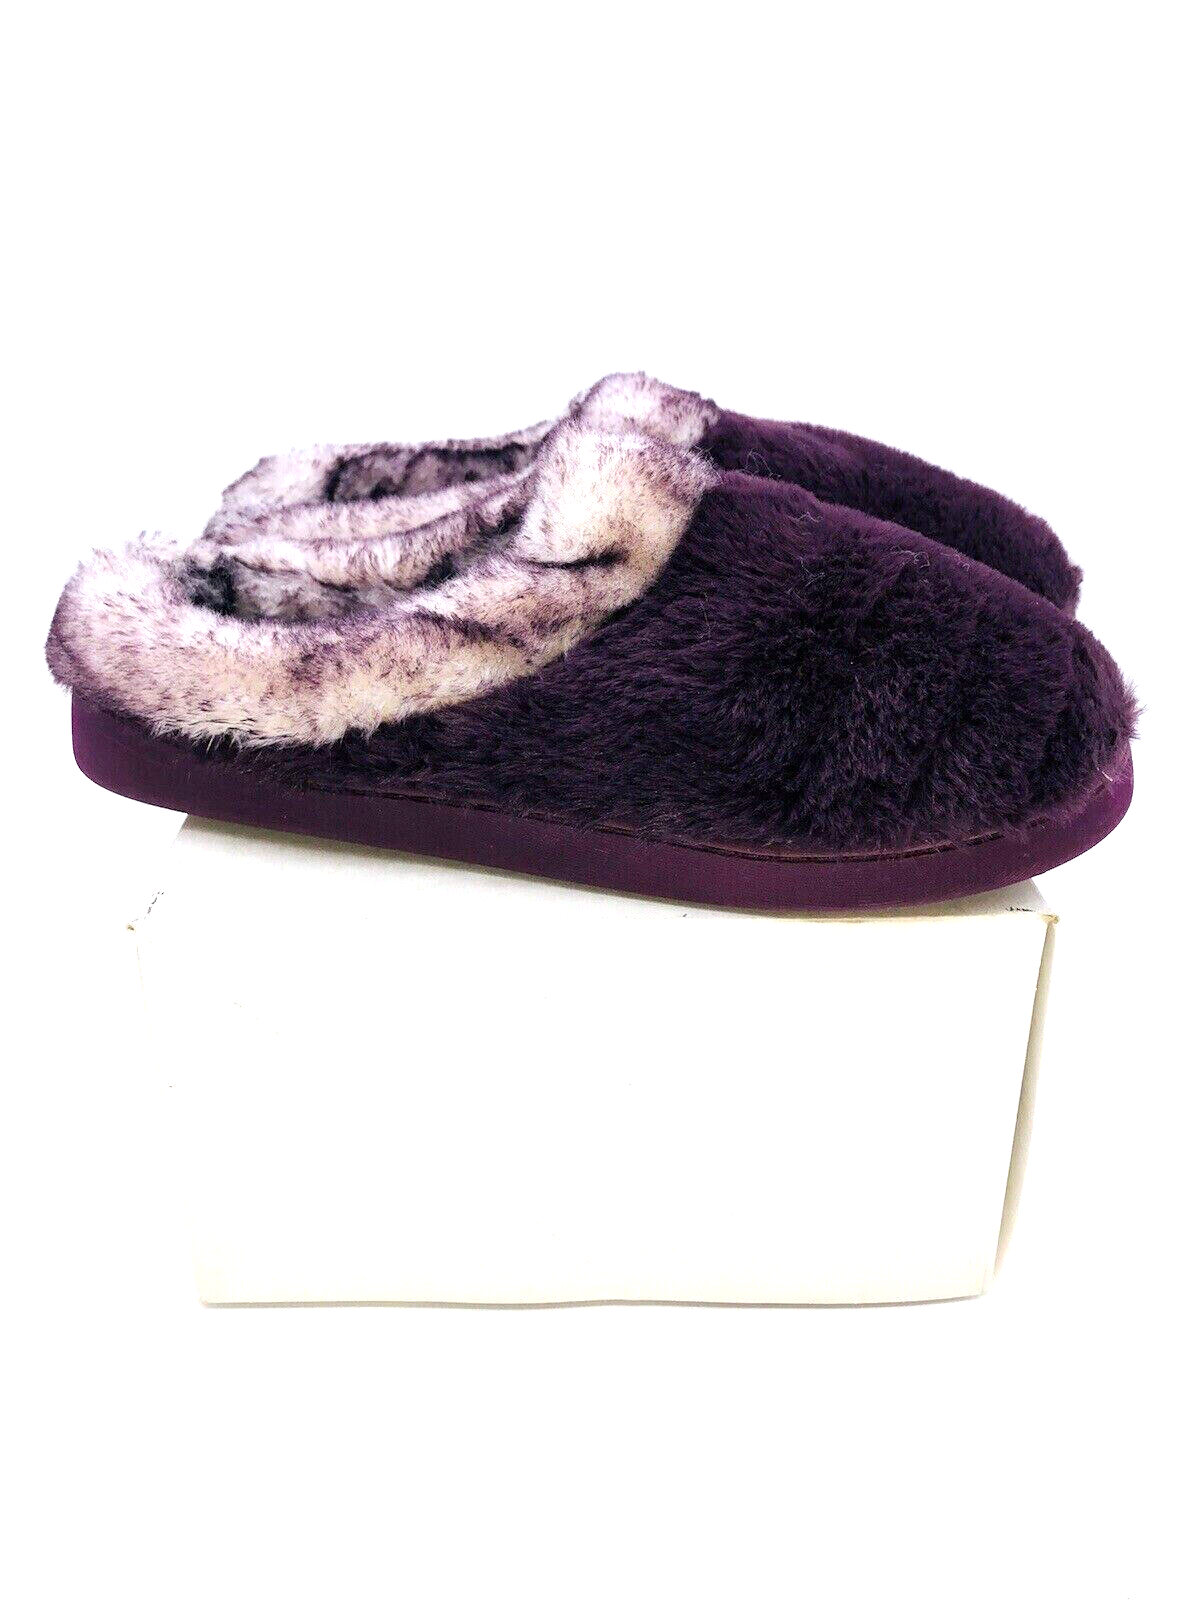 Primary image for Cuddl Duds Women Frosted Faux Fur Clog Slipper- Boysenberry, Large (US 9-10)